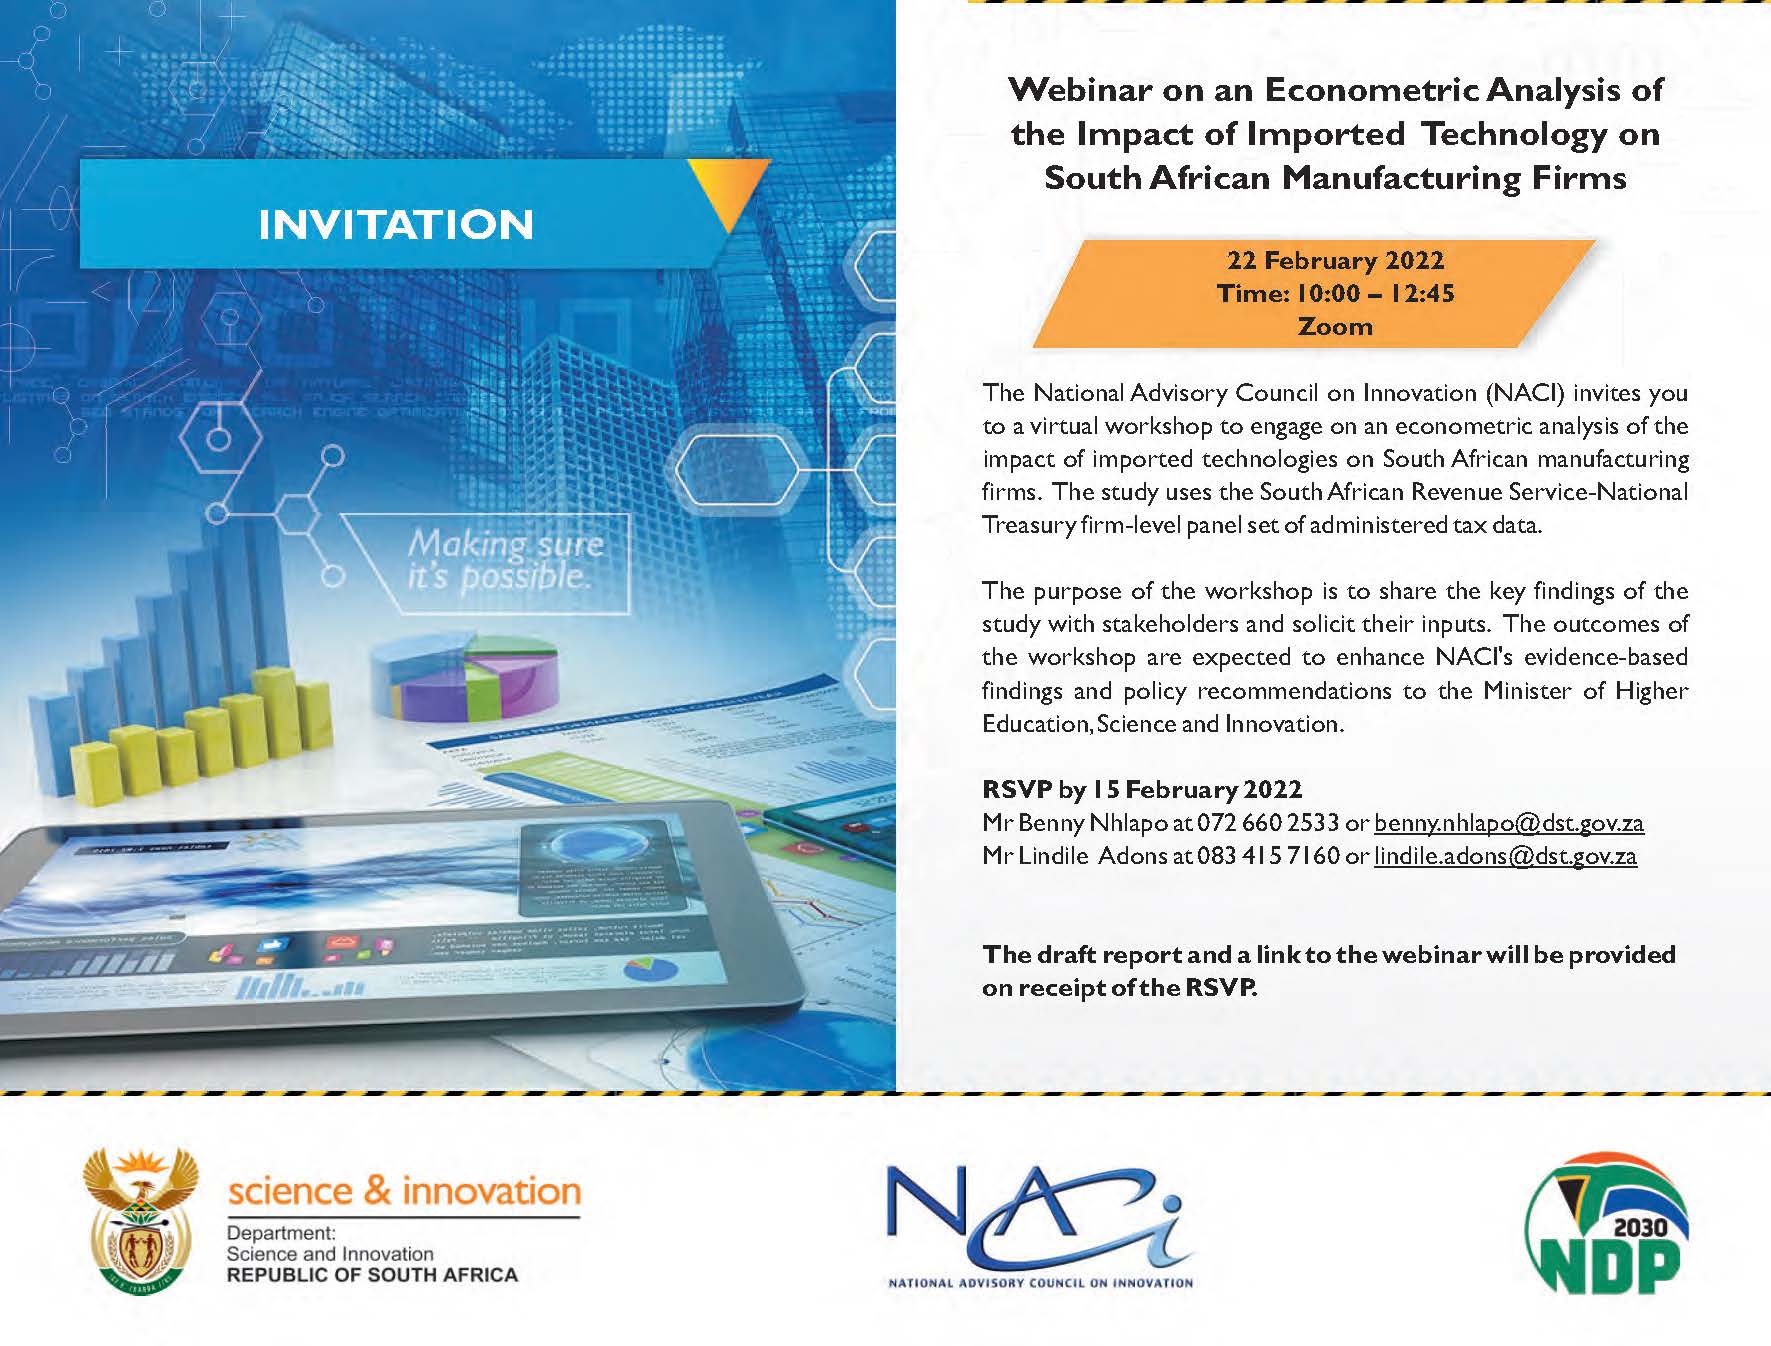 Invitation_Webinar on an Econometric Analysis of the Impact of Imported Technology on South African Manufacturing Firms